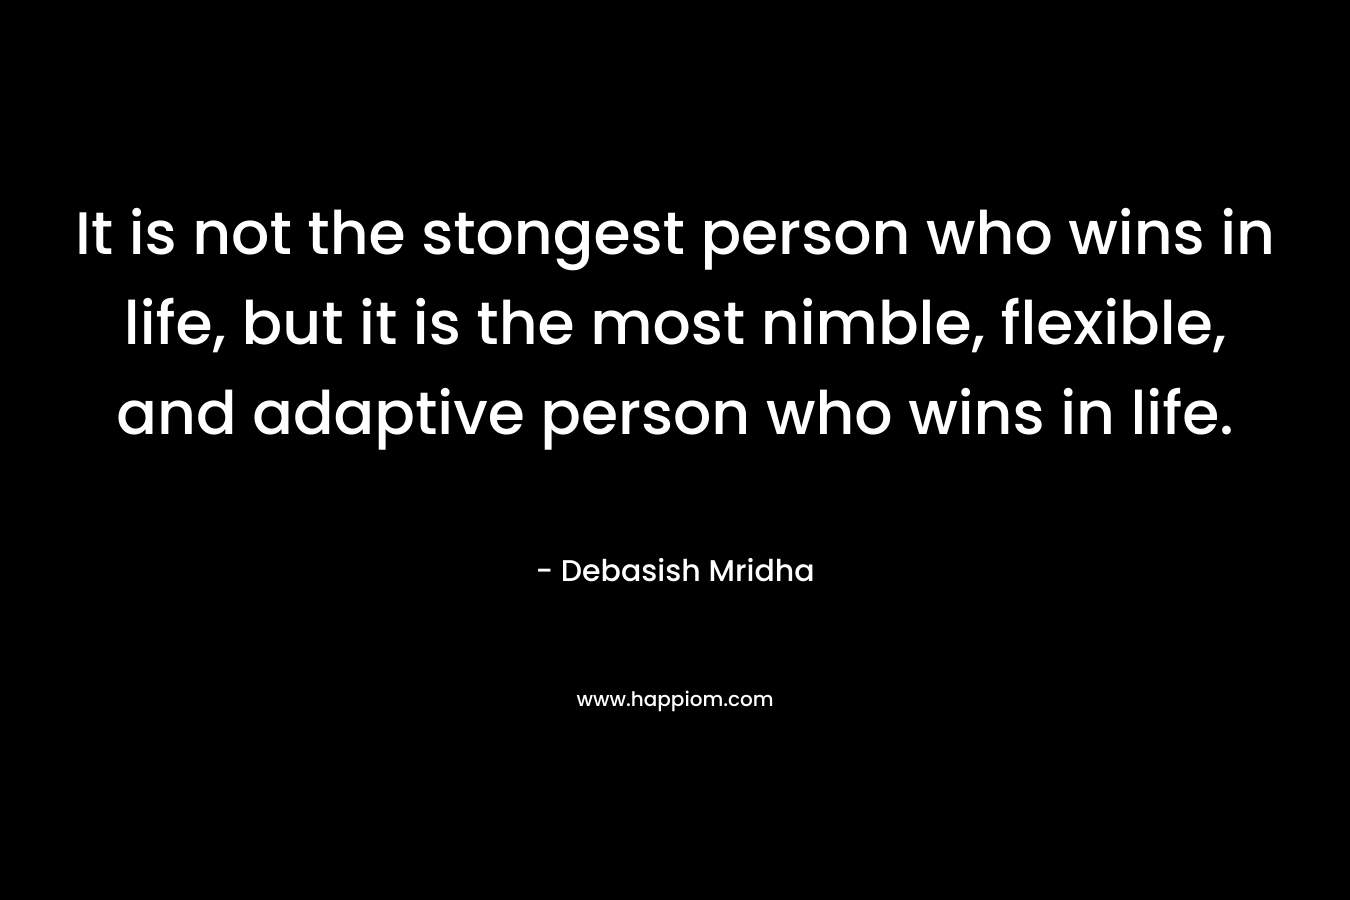 It is not the stongest person who wins in life, but it is the most nimble, flexible, and adaptive person who wins in life. – Debasish Mridha